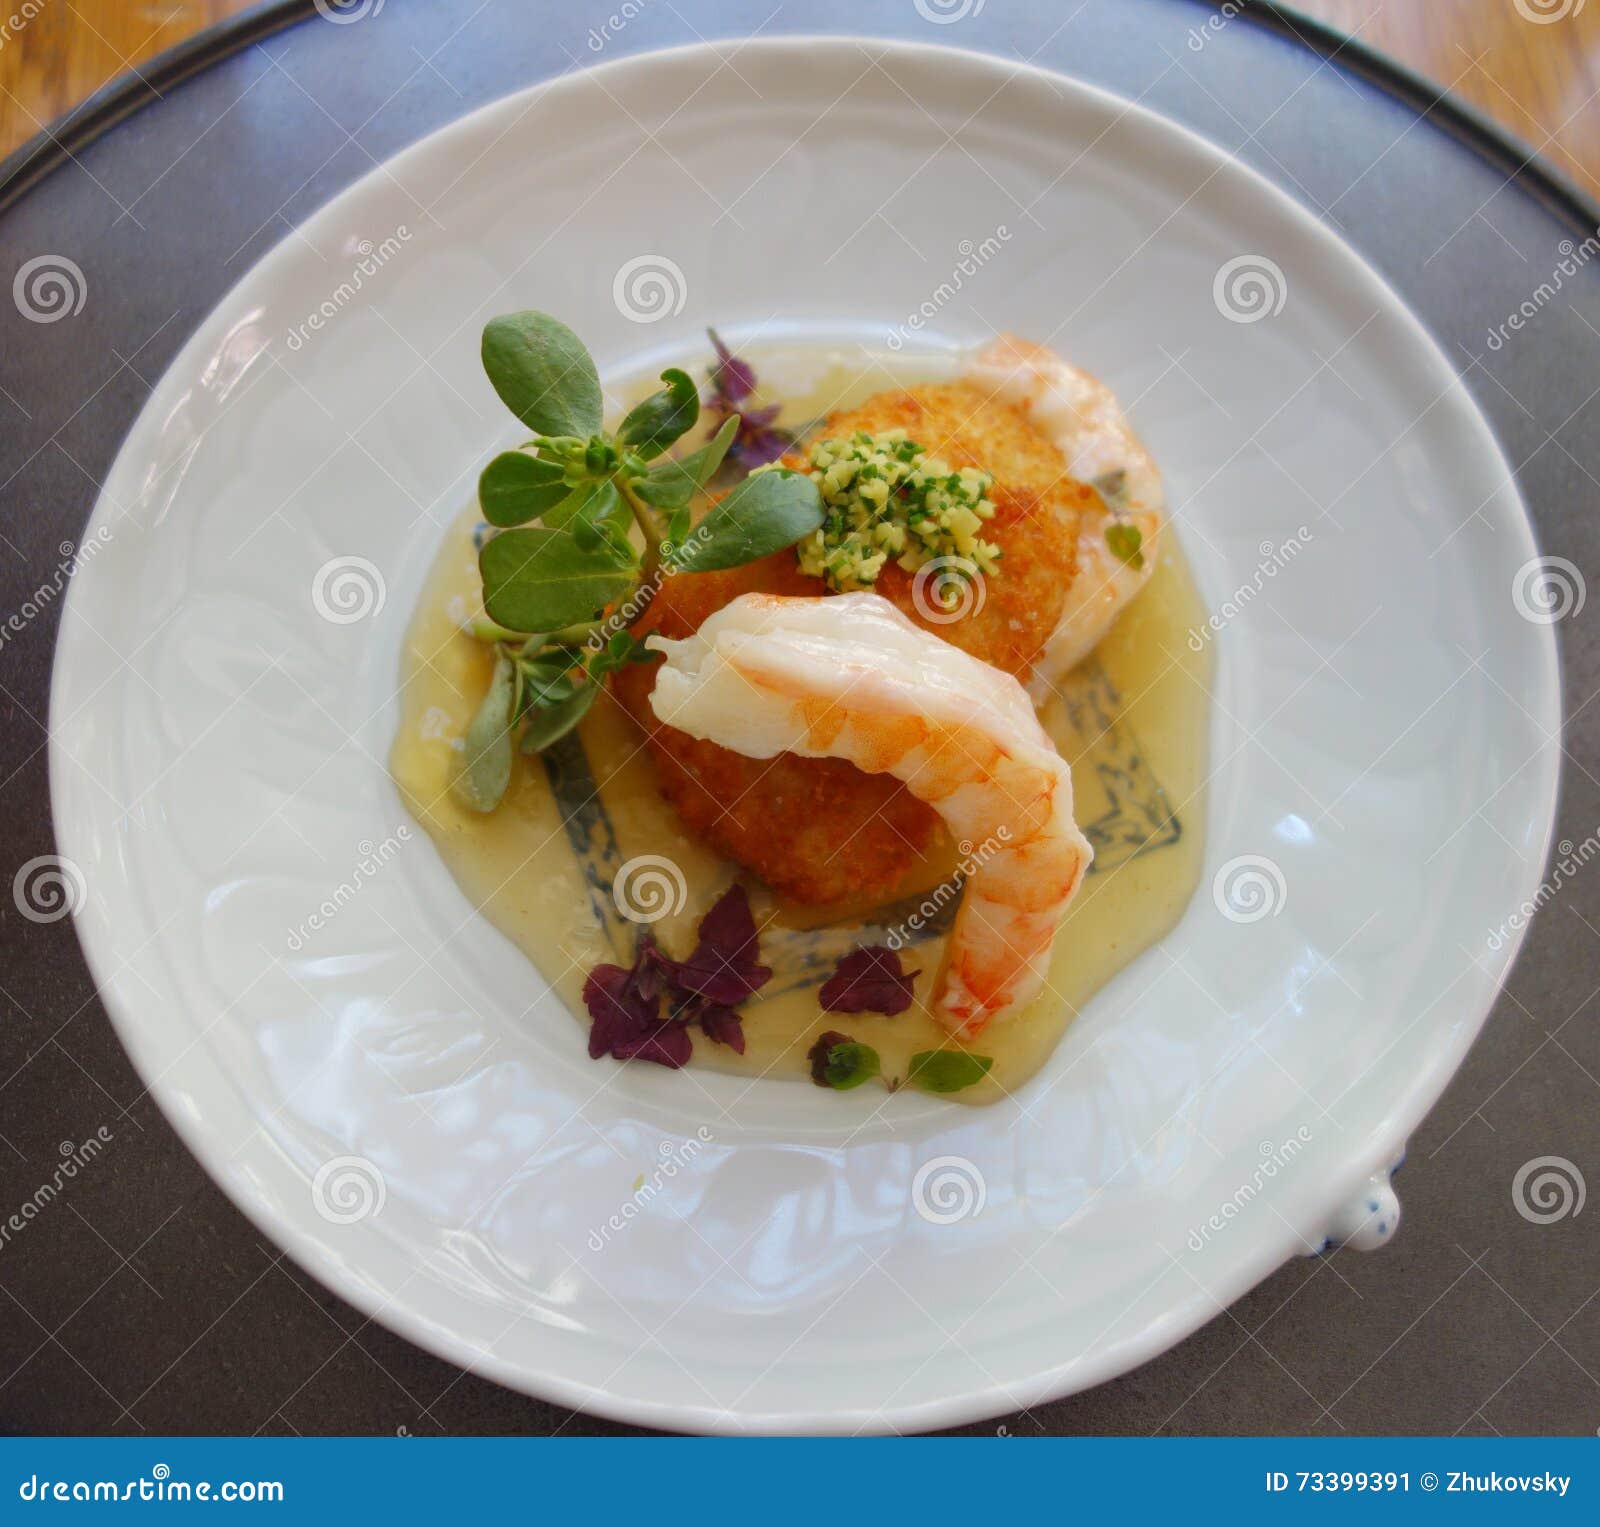 Seafood Dish Served In Gourmet Restaurant Stock Image ...